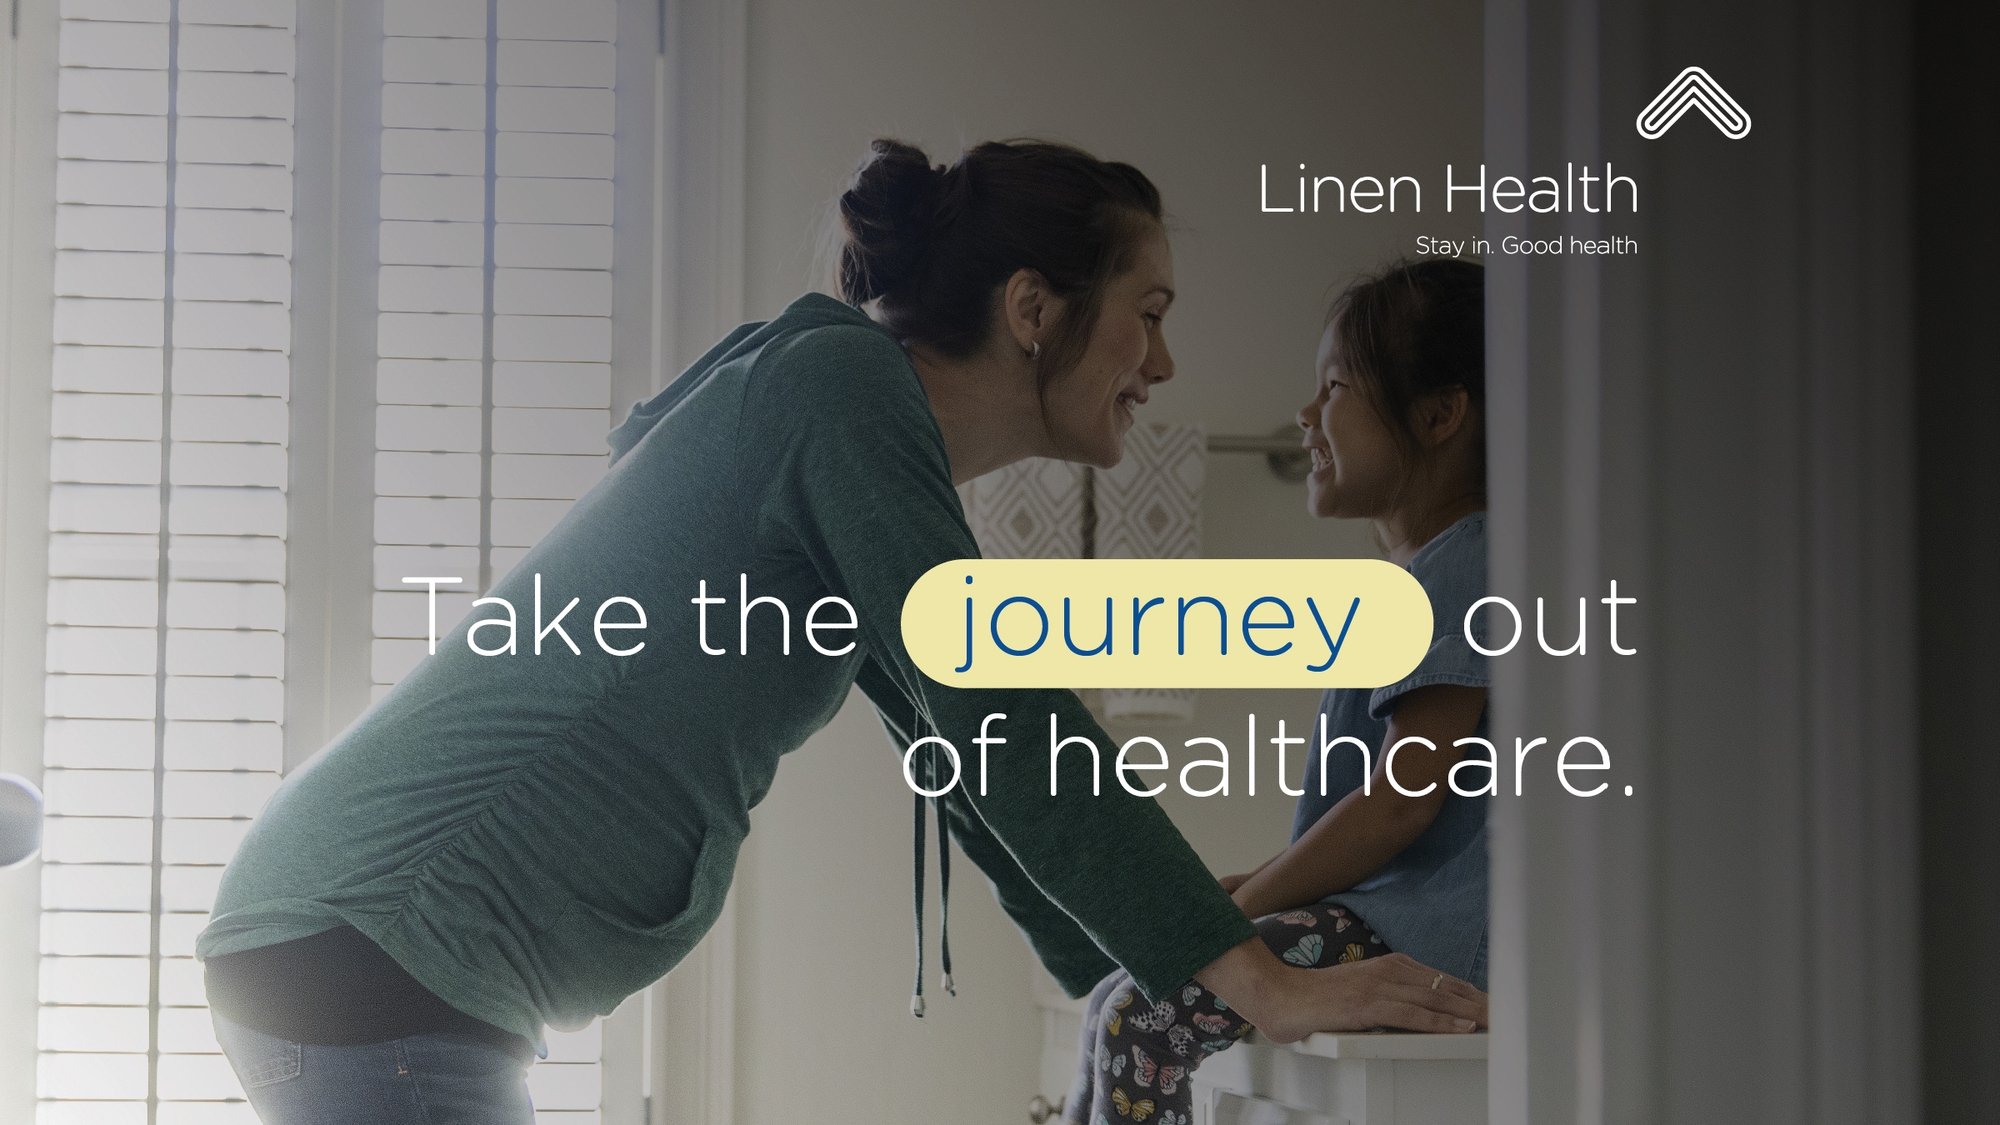 Linen Health - Take the journey out of healthcare with a woman and child smiling and interacting